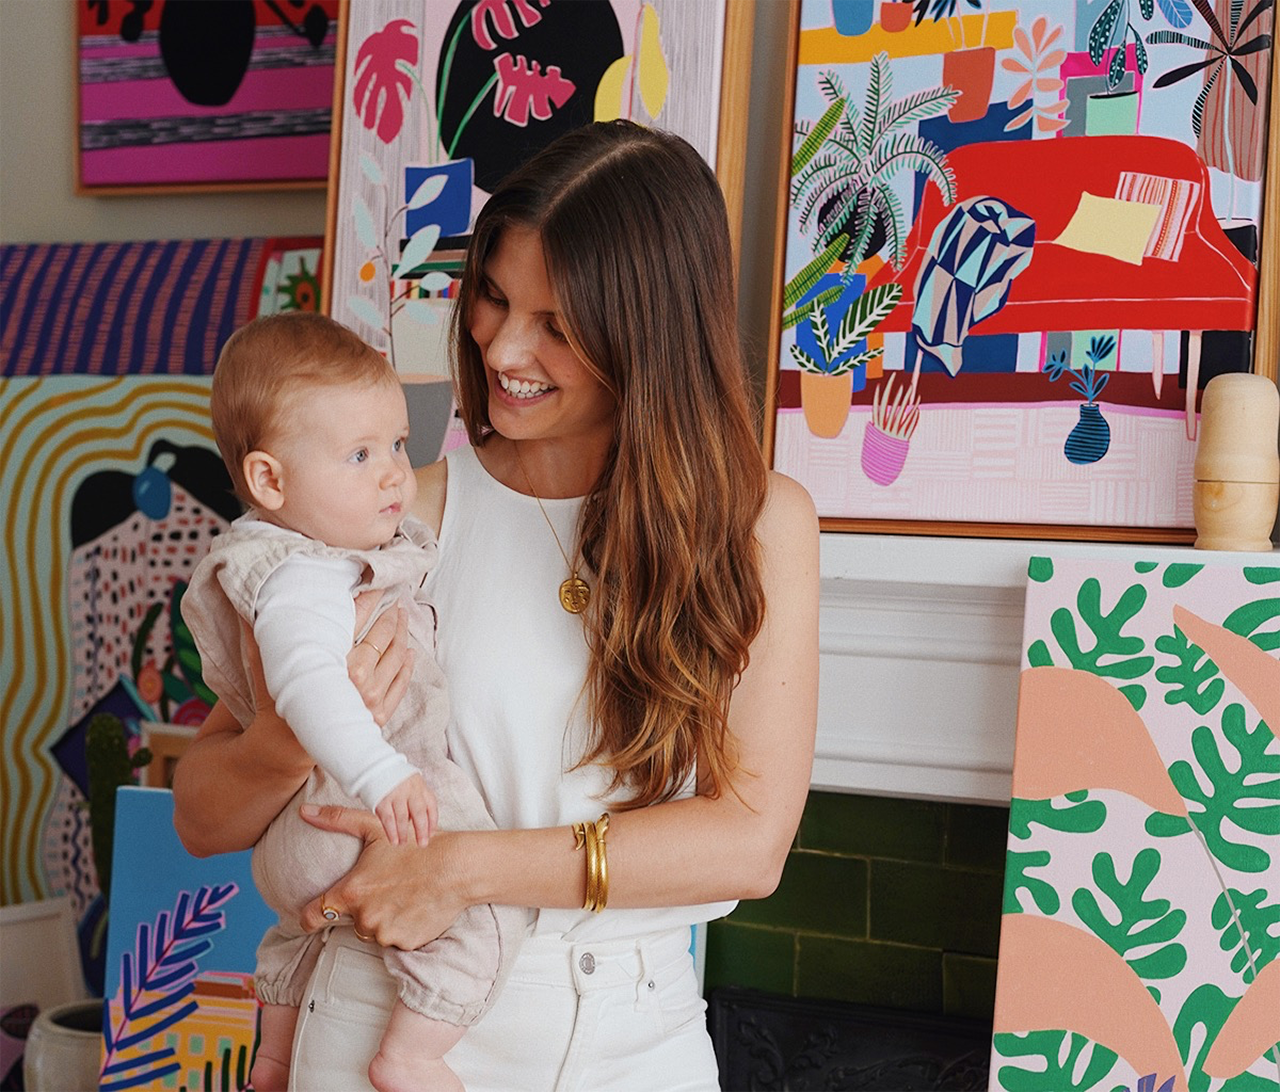 light skinned woman holding child standing in front of artworks